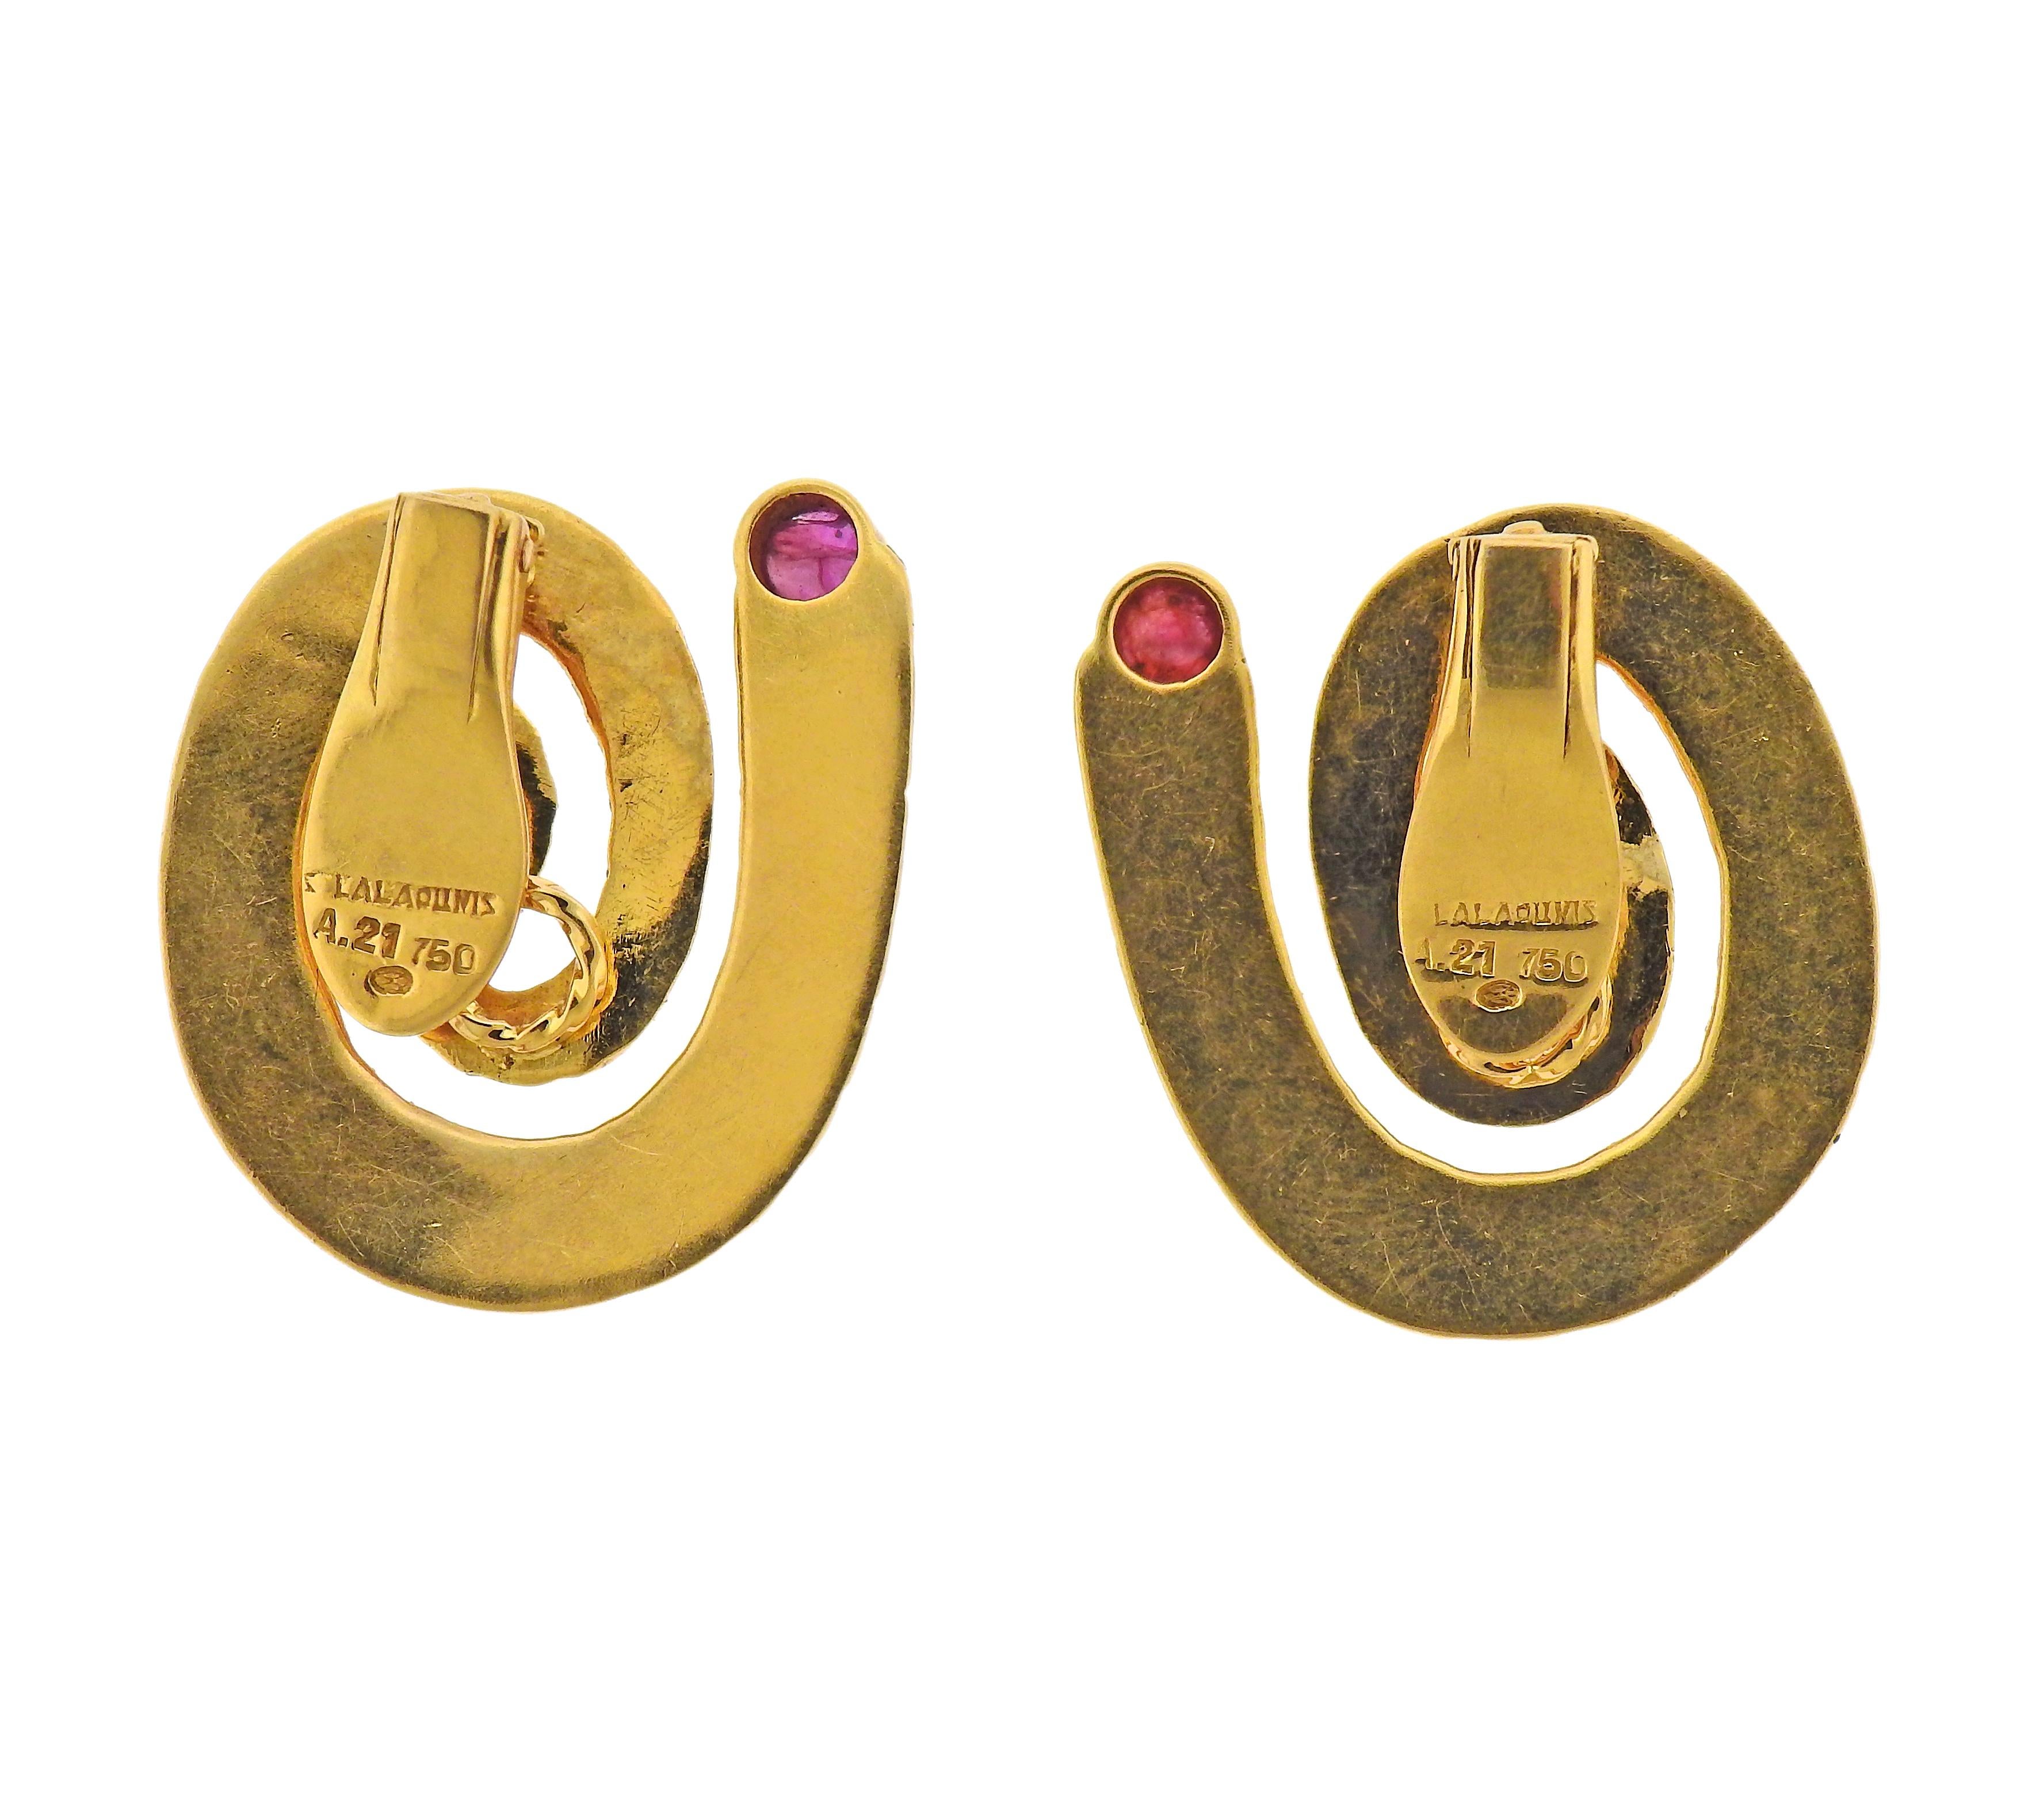 Pair of large 18k gold swirl earrings with rubies. Designed by Ilias Lalaunis, measuring 30mm x 25mm. Marked: A21, 750, I. Lalaounis. Weight - 16.4 grams. 